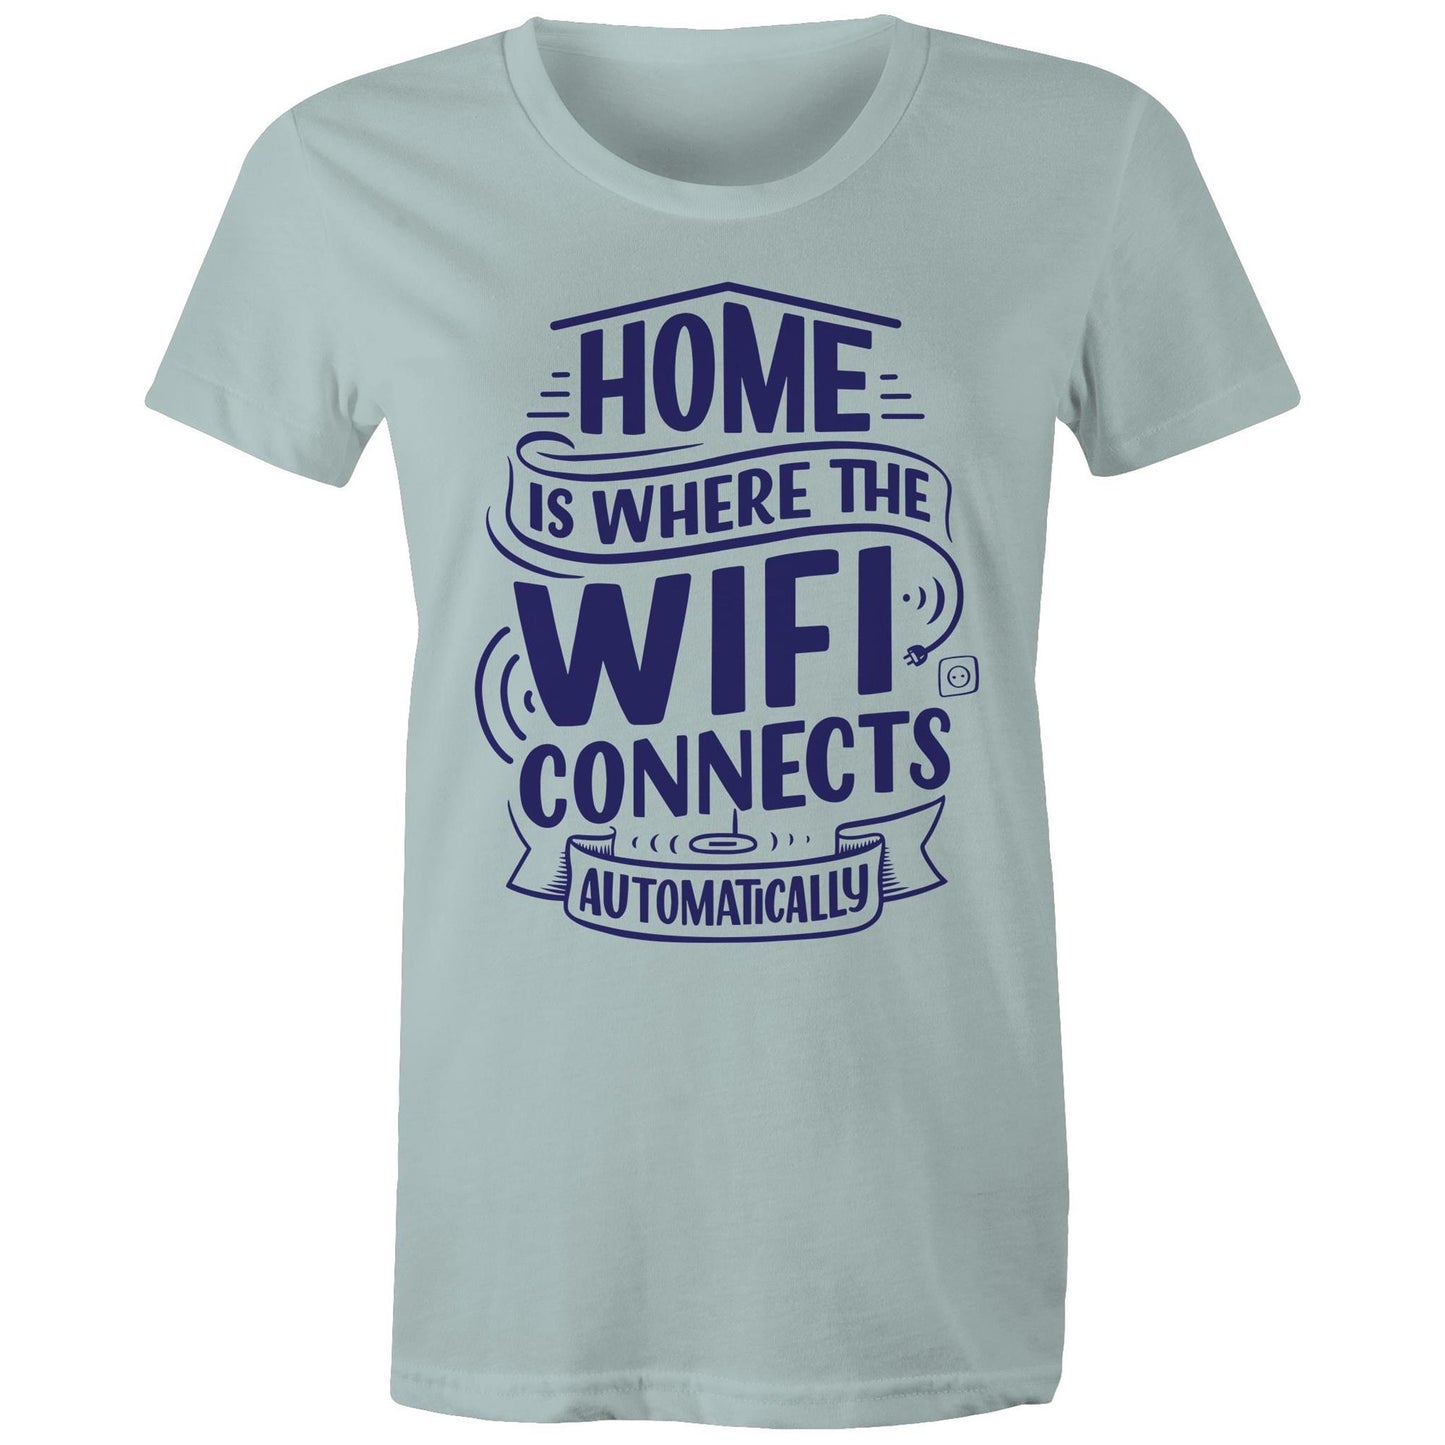 Home Is Where The WIFI Connects Automatically - Womens T-shirt Pale Blue Womens T-shirt Tech